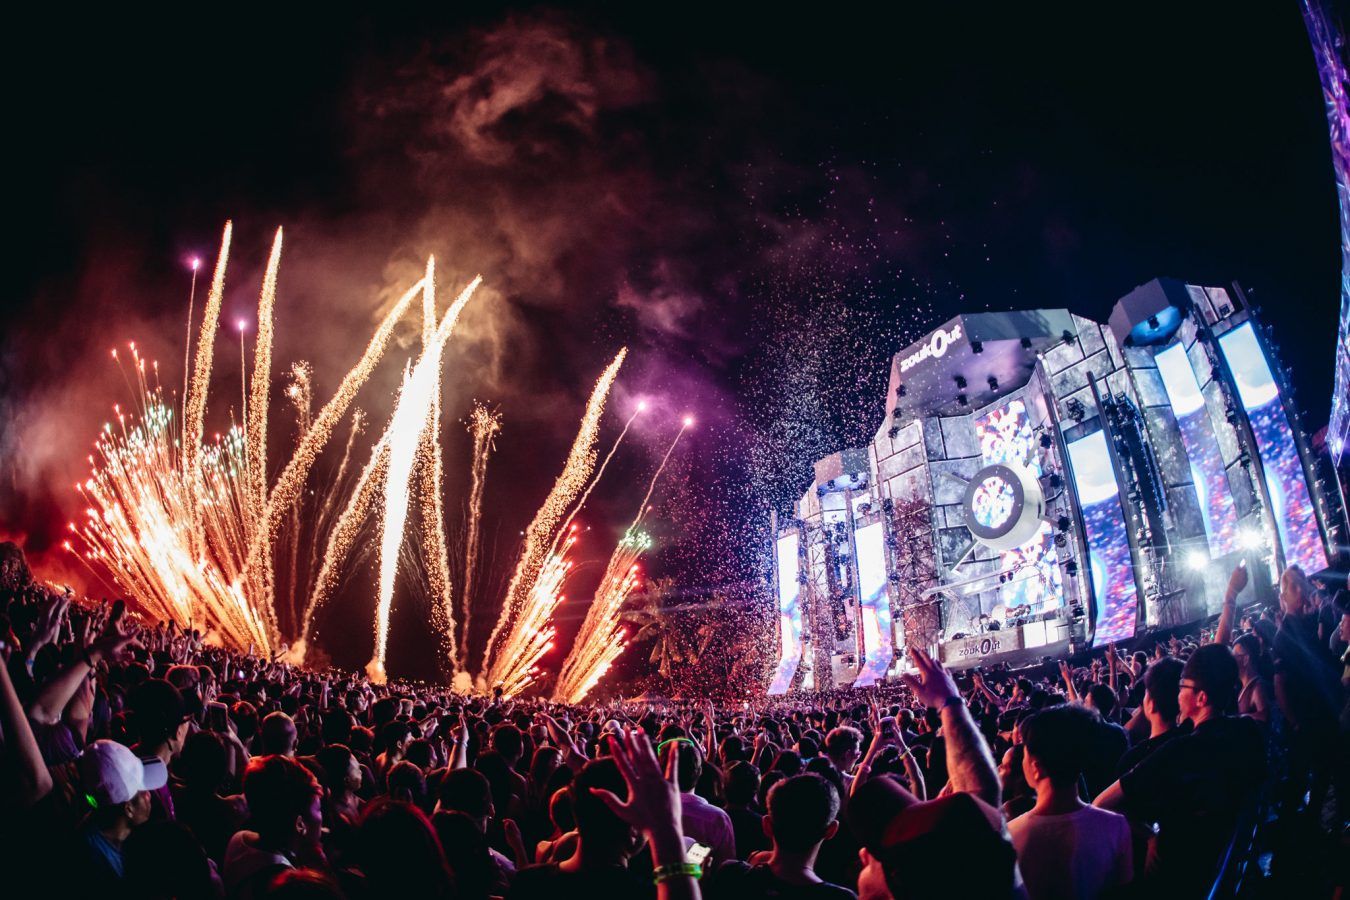 Zoukout Singapore returns in December 2022 with Tiesto and Zedd as headliners